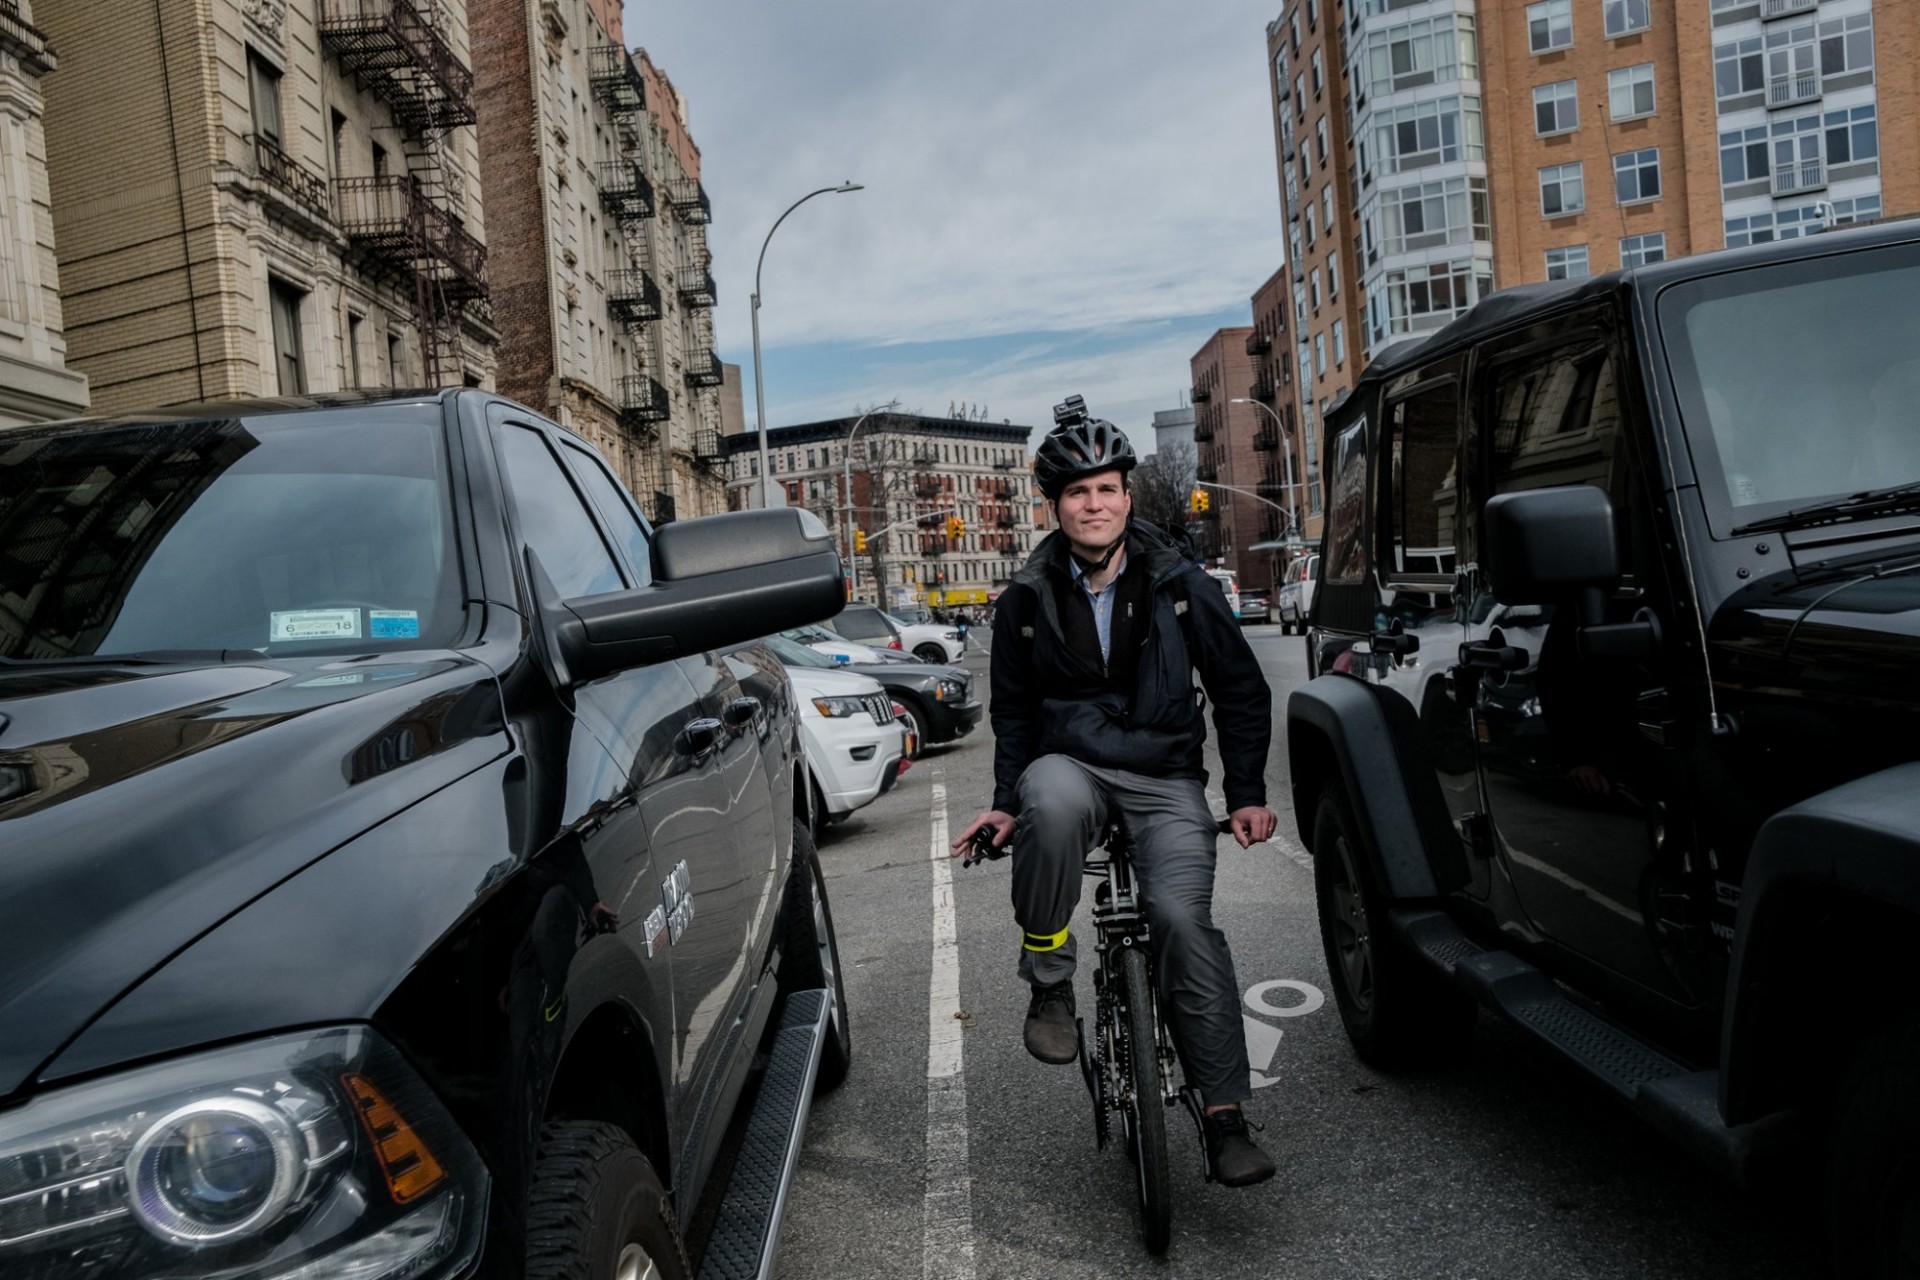 Alex Bell developed a computer program that used a traffic camera to identify how often bus and bicycle lanes were blocked by unauthorized vehicles along one block in Harlem.
—Christopher Lee for The New York Times